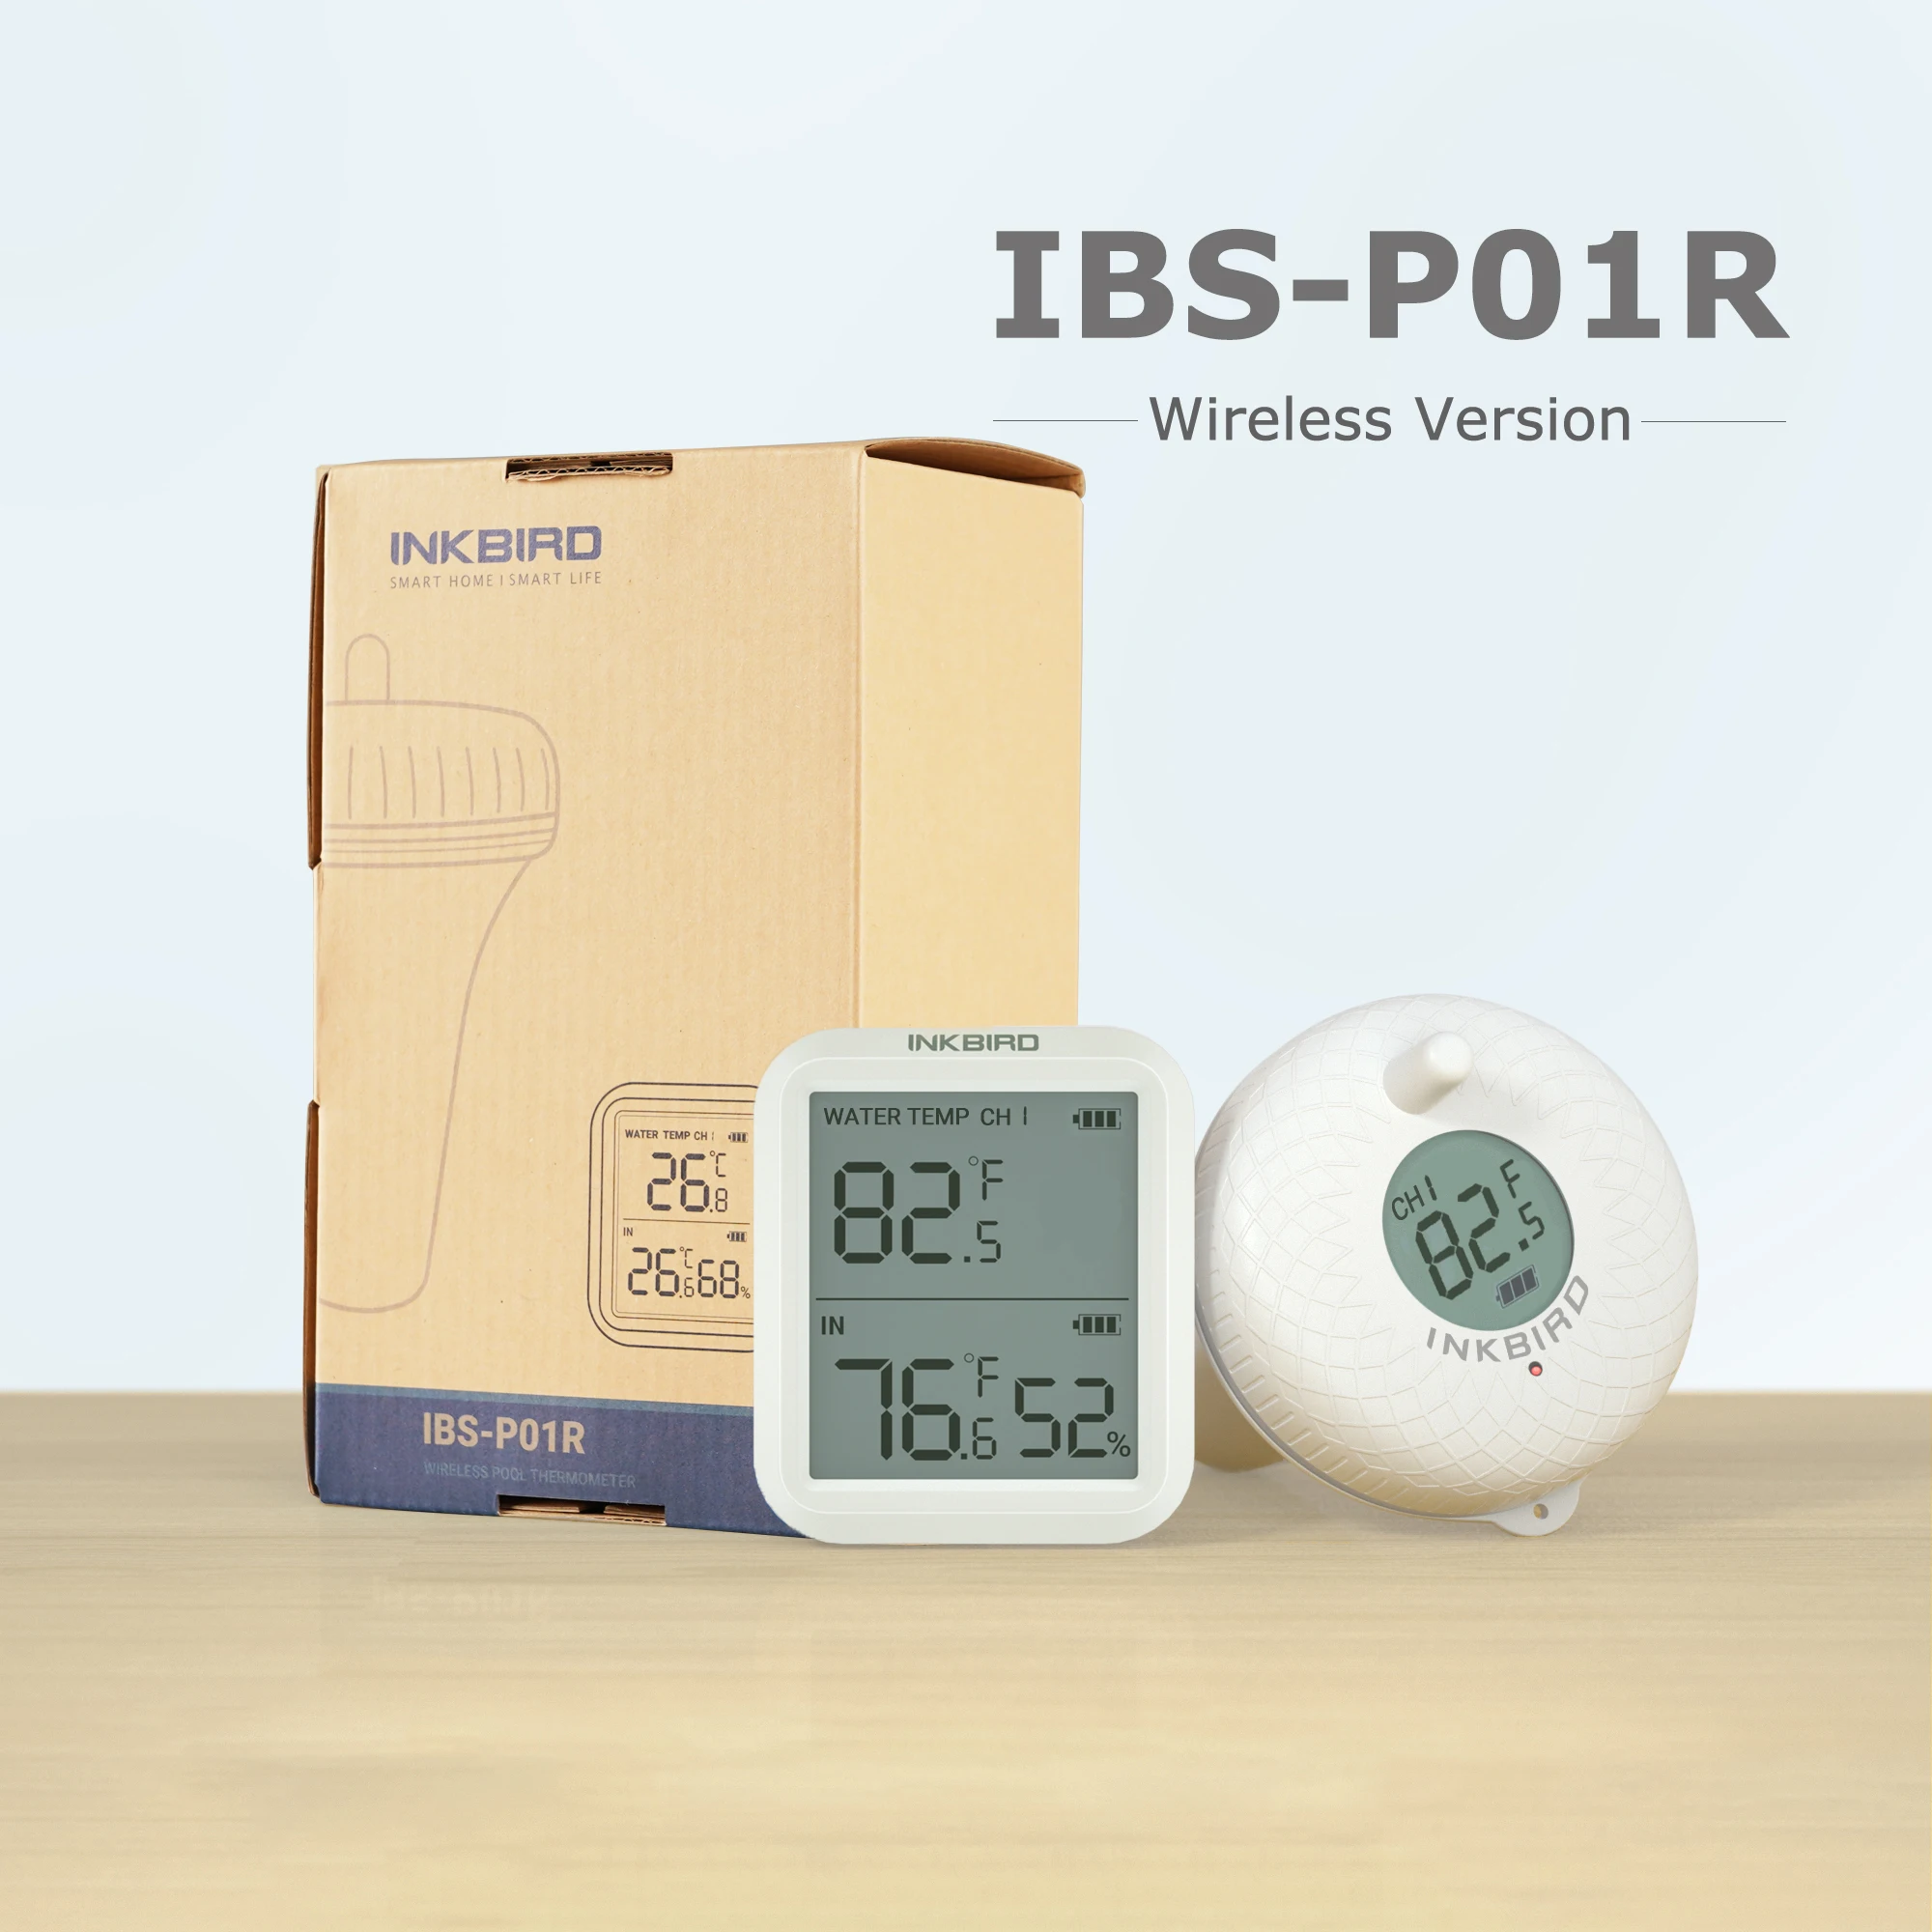 https://ae01.alicdn.com/kf/Hbc5bce2a67574de49f31ef24c88da5822/INKBIRD-IBS-P01R-Floating-Swimming-Pool-Wireless-Digital-Pool-Thermometer-with-Premium-Quality-for-Spa-Spring.jpg